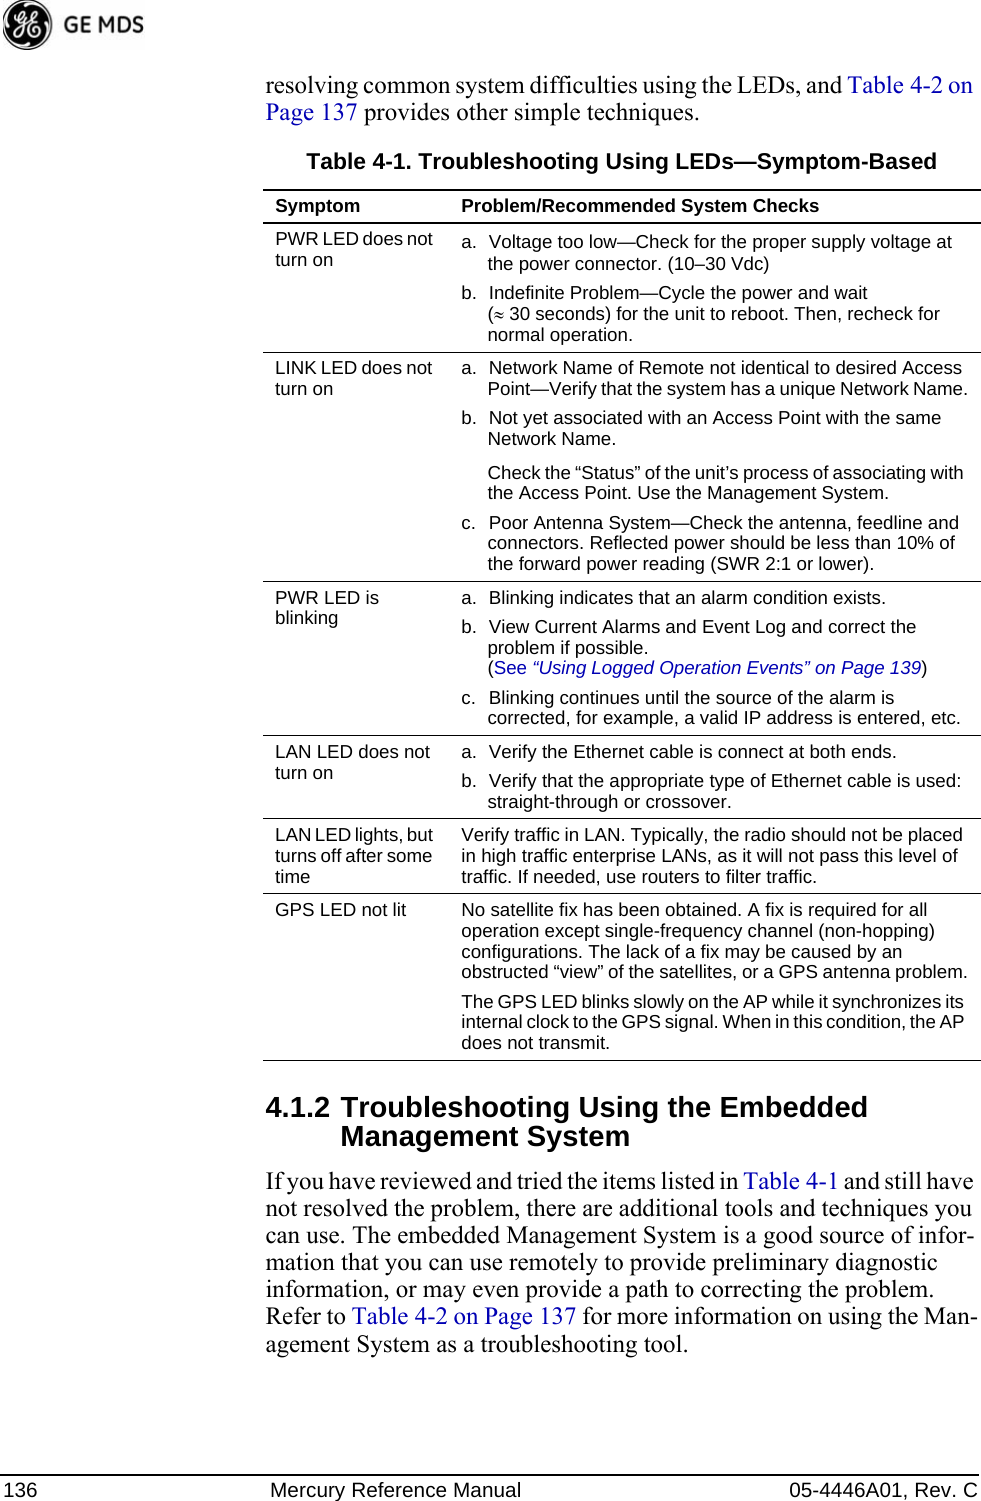 136 Mercury Reference Manual 05-4446A01, Rev. Cresolving common system difficulties using the LEDs, and Table 4-2 on Page 137 provides other simple techniques. 4.1.2 Troubleshooting Using the Embedded Management SystemIf you have reviewed and tried the items listed in Table 4-1 and still have not resolved the problem, there are additional tools and techniques you can use. The embedded Management System is a good source of infor-mation that you can use remotely to provide preliminary diagnostic information, or may even provide a path to correcting the problem. Refer to Table 4-2 on Page 137 for more information on using the Man-agement System as a troubleshooting tool.Table 4-1. Troubleshooting Using LEDs—Symptom-BasedSymptom Problem/Recommended System ChecksPWR LED does not turn on a. Voltage too low—Check for the proper supply voltage at the power connector. (10–30 Vdc)b. Indefinite Problem—Cycle the power and wait (≈30 seconds) for the unit to reboot. Then, recheck for normal operation.LINK LED does not turn on a. Network Name of Remote not identical to desired Access Point—Verify that the system has a unique Network Name.b. Not yet associated with an Access Point with the same Network Name.Check the “Status” of the unit’s process of associating with the Access Point. Use the Management System.c. Poor Antenna System—Check the antenna, feedline and connectors. Reflected power should be less than 10% of the forward power reading (SWR 2:1 or lower). PWR LED is blinking a. Blinking indicates that an alarm condition exists. b. View Current Alarms and Event Log and correct the problem if possible.(See “Using Logged Operation Events” on Page 139)c. Blinking continues until the source of the alarm is corrected, for example, a valid IP address is entered, etc.LAN LED does not turn on a. Verify the Ethernet cable is connect at both ends.b. Verify that the appropriate type of Ethernet cable is used: straight-through or crossover.LAN LED lights, but turns off after some timeVerify traffic in LAN. Typically, the radio should not be placed in high traffic enterprise LANs, as it will not pass this level of traffic. If needed, use routers to filter traffic.GPS LED not lit No satellite fix has been obtained. A fix is required for all operation except single-frequency channel (non-hopping) configurations. The lack of a fix may be caused by an obstructed “view” of the satellites, or a GPS antenna problem.The GPS LED blinks slowly on the AP while it synchronizes its internal clock to the GPS signal. When in this condition, the AP does not transmit.